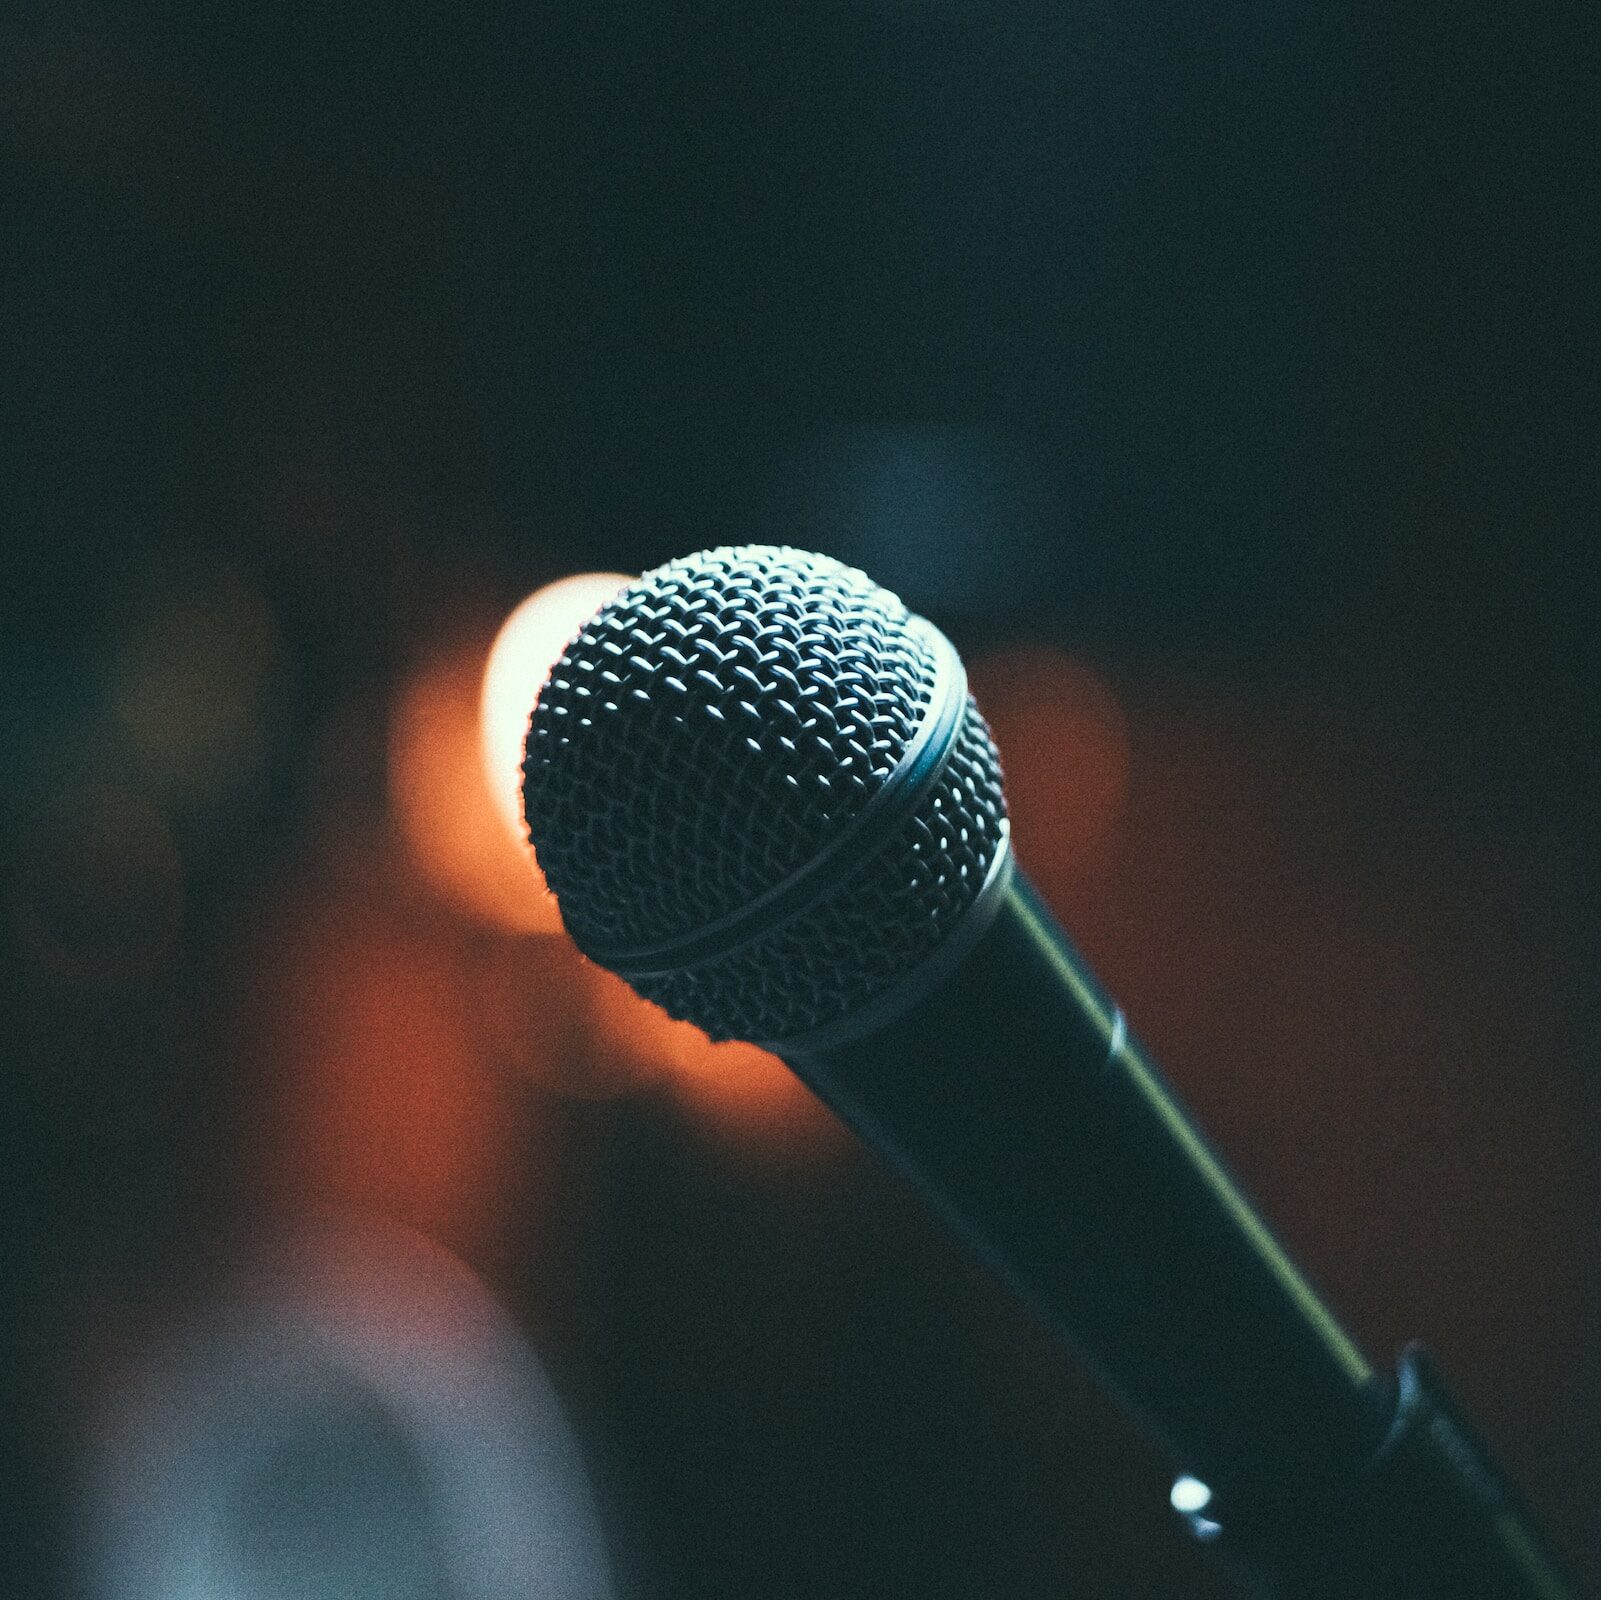 An up-close shot of a stand up comedy microphone on stage with dark lighting in the background.